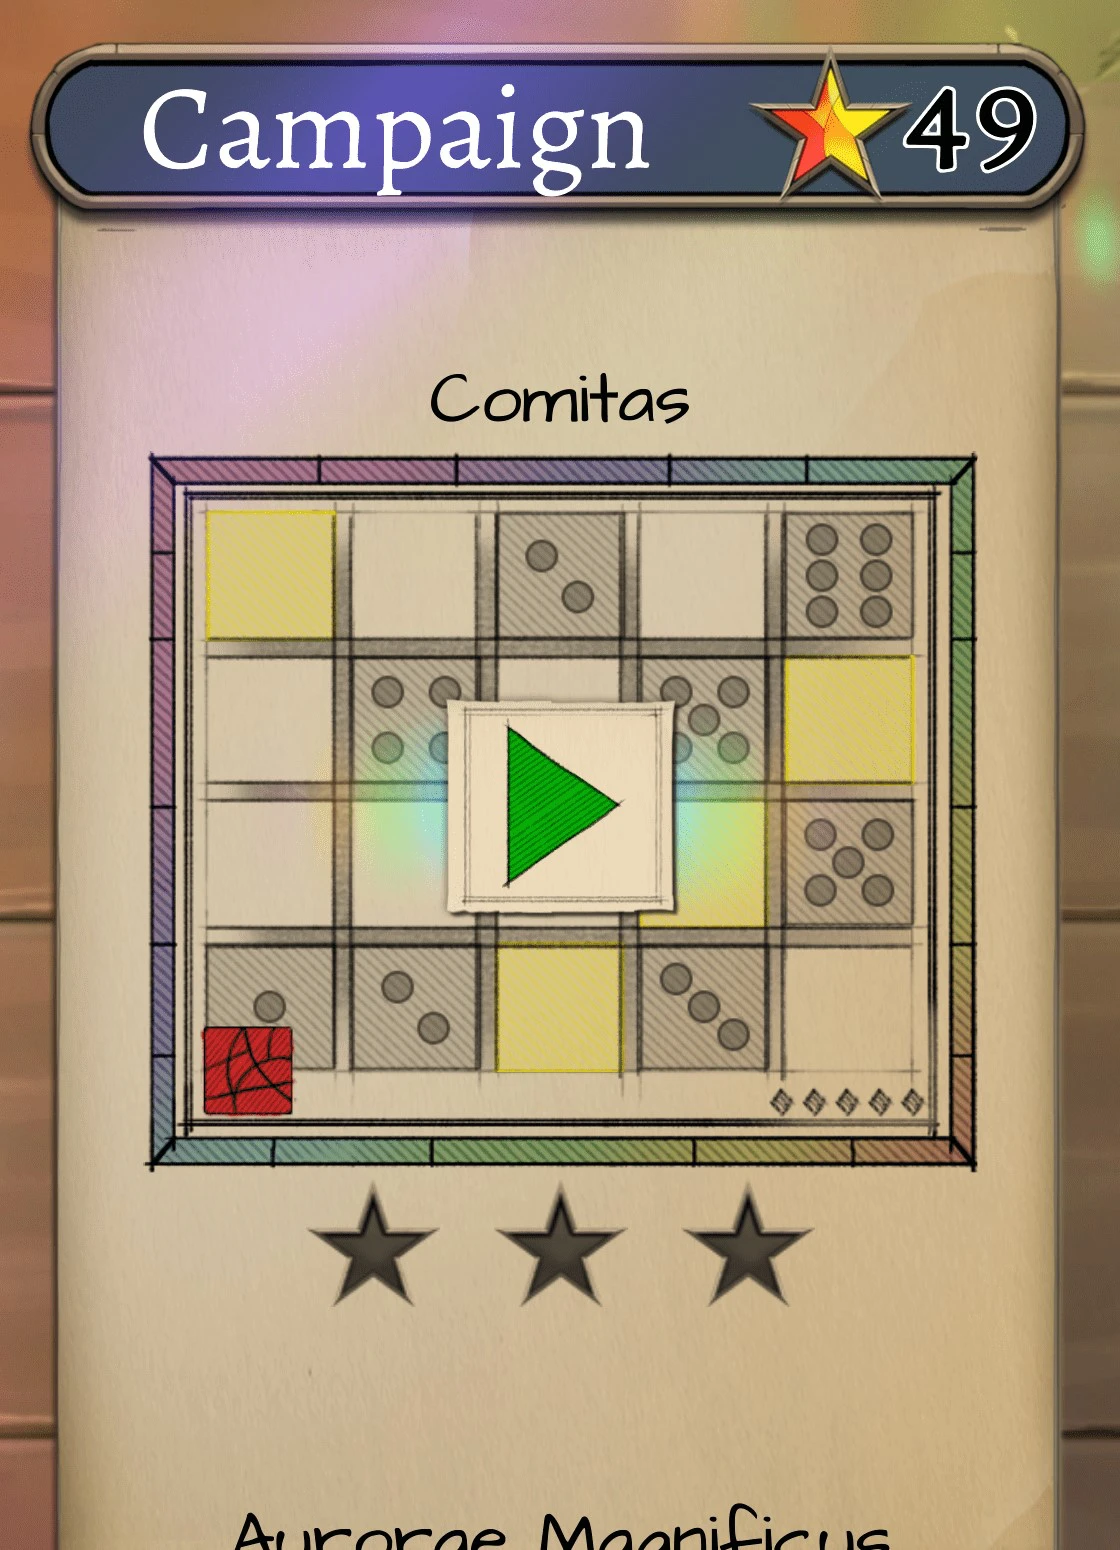 screen to pick a campaign game, with the layout puzzle being displayed.